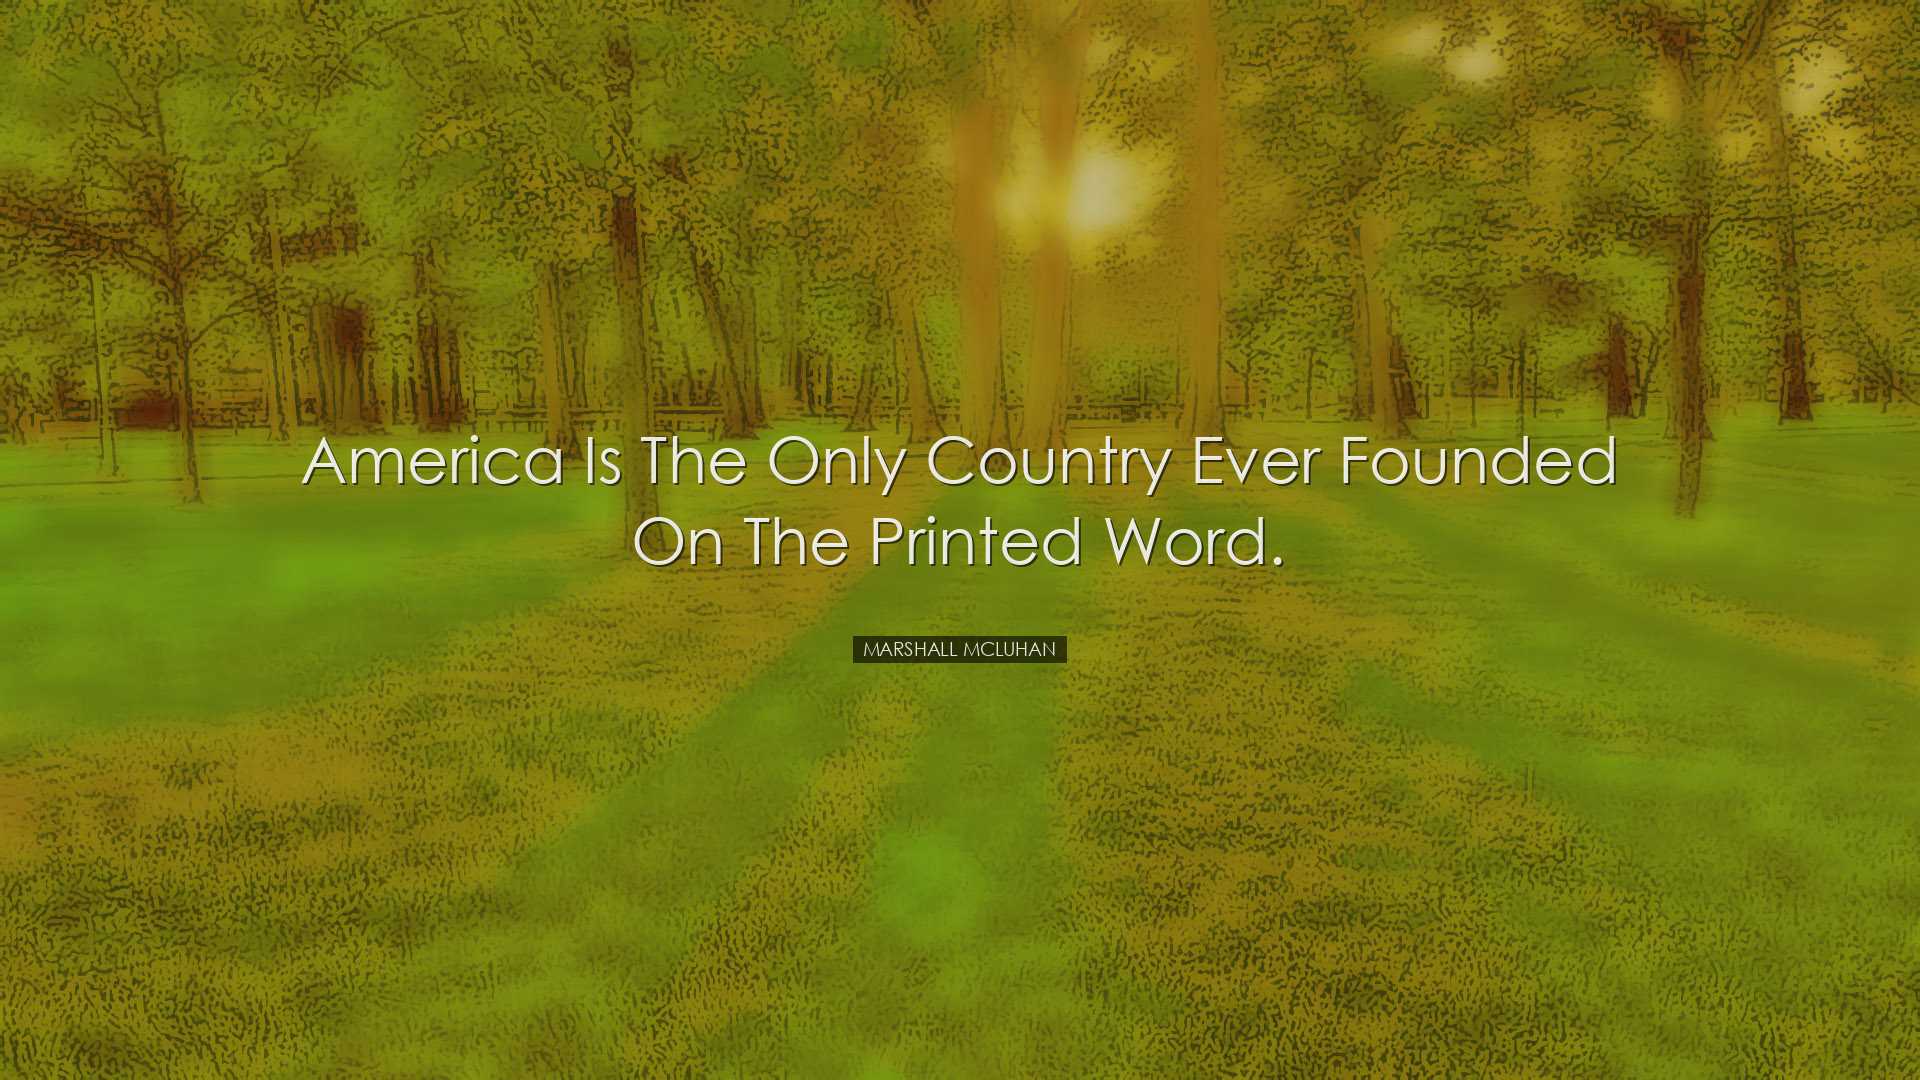 America is the only country ever founded on the printed word. - Ma